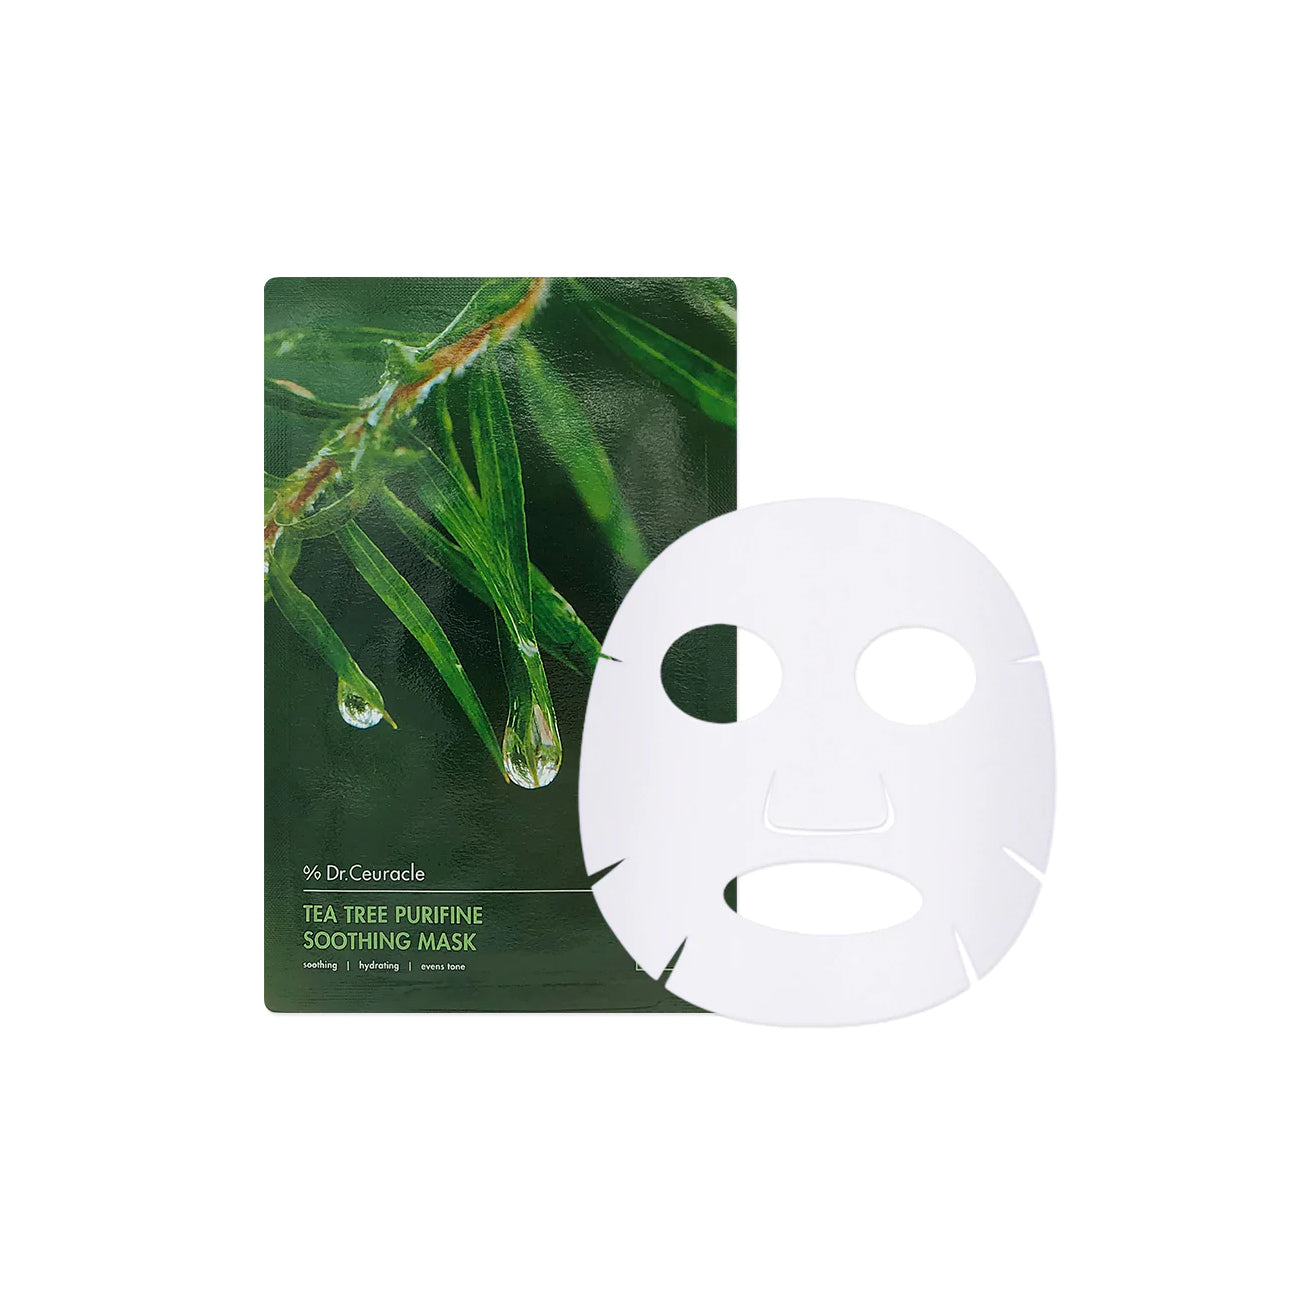 Dr. Ceuracle Tea Tree Purifine Soothing Mask Beauty Dr. Ceuracle   